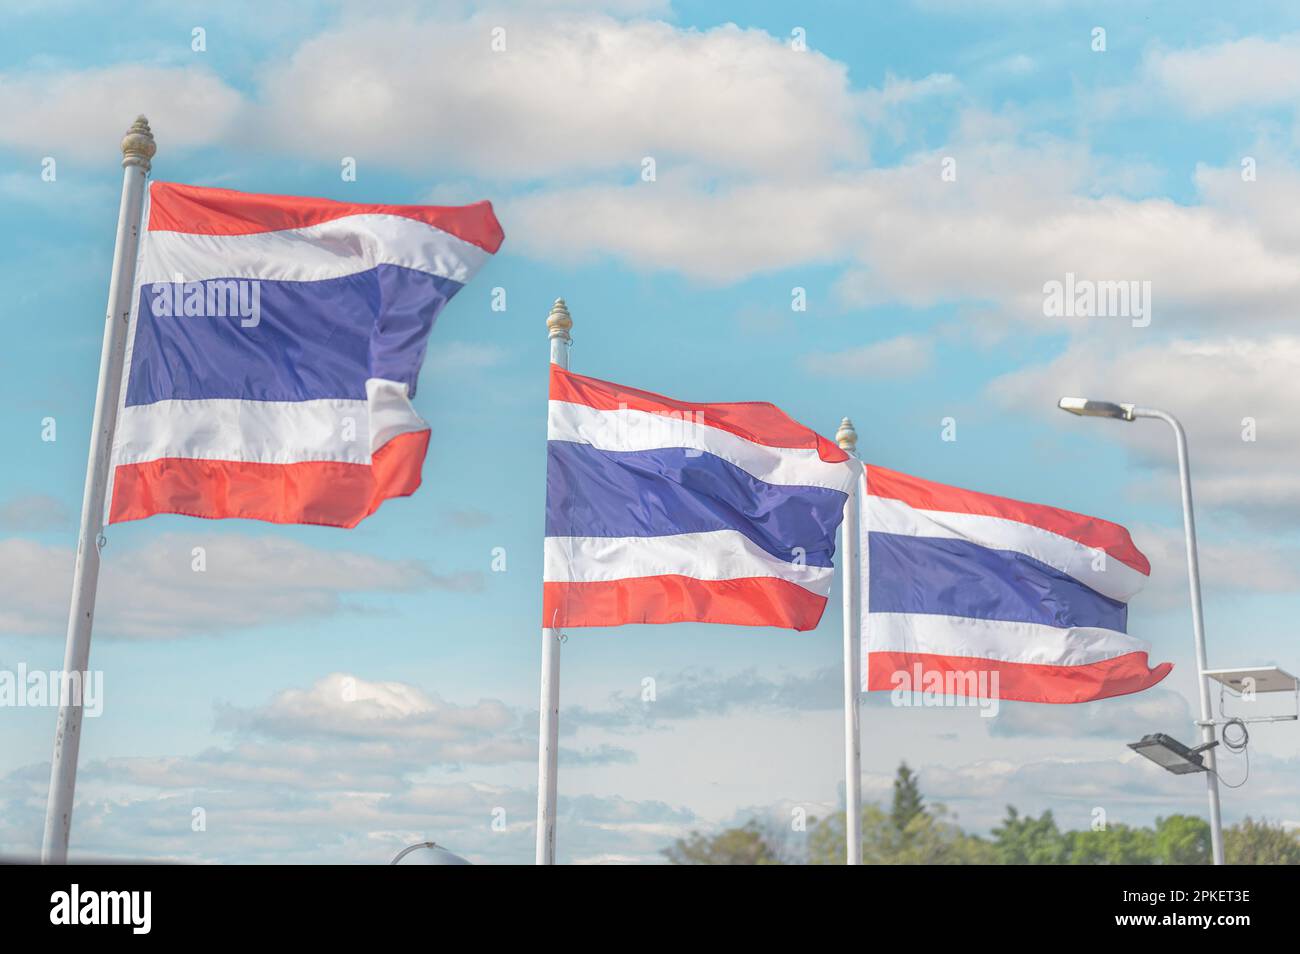 thailand flag. Image of waving three Thai flags of Thailand with blue sky background. Thailand flag waving in wind with beautiful blue sky Stock Photo